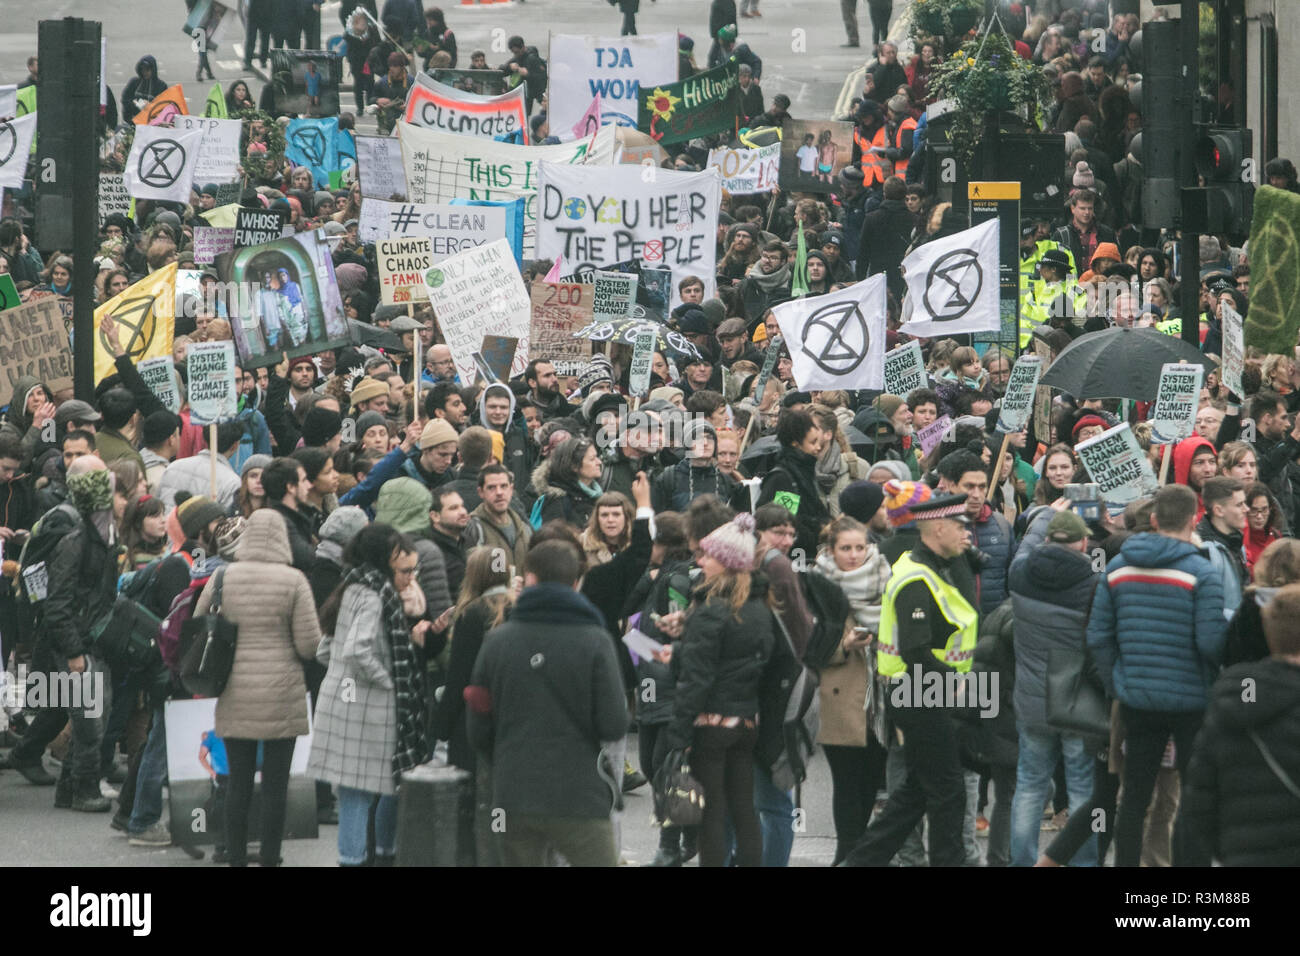 London UK. 24th November 2018. Hundreds of climate change activists from Extinction Rebellion continue their protest as they marched  through Whitehall aimed at highlighting the government’s failure to recognise and act on the ecological and climate emergency Credit: amer ghazzal/Alamy Live News Stock Photo